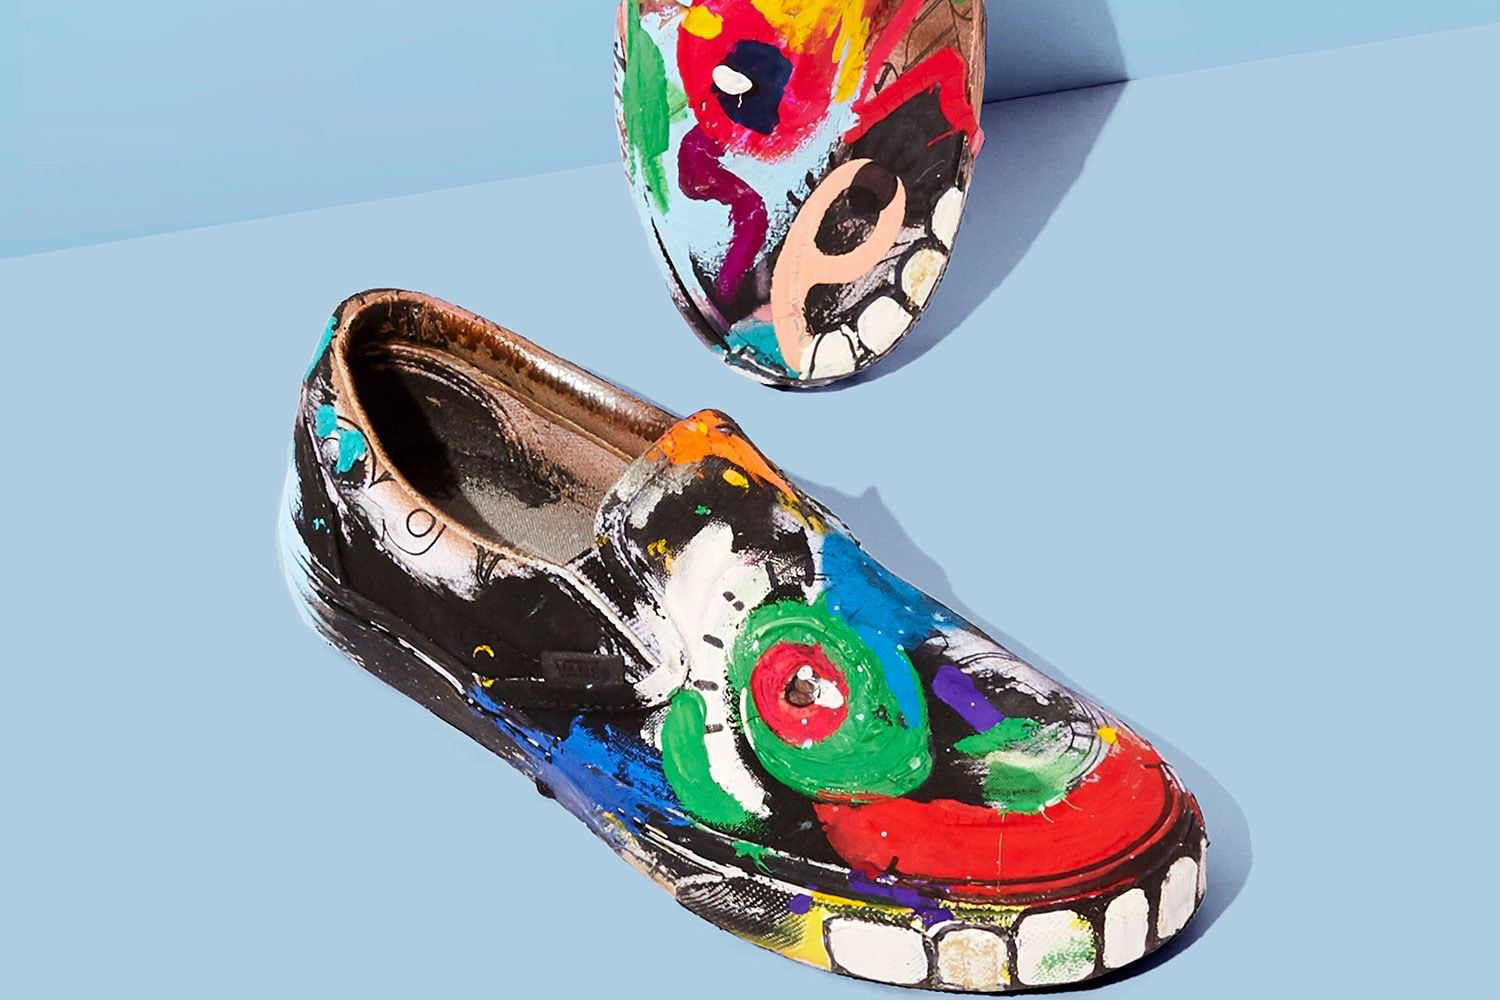 marc jacobs and vans slip on capsule collection - the chicflaneuse.com 7